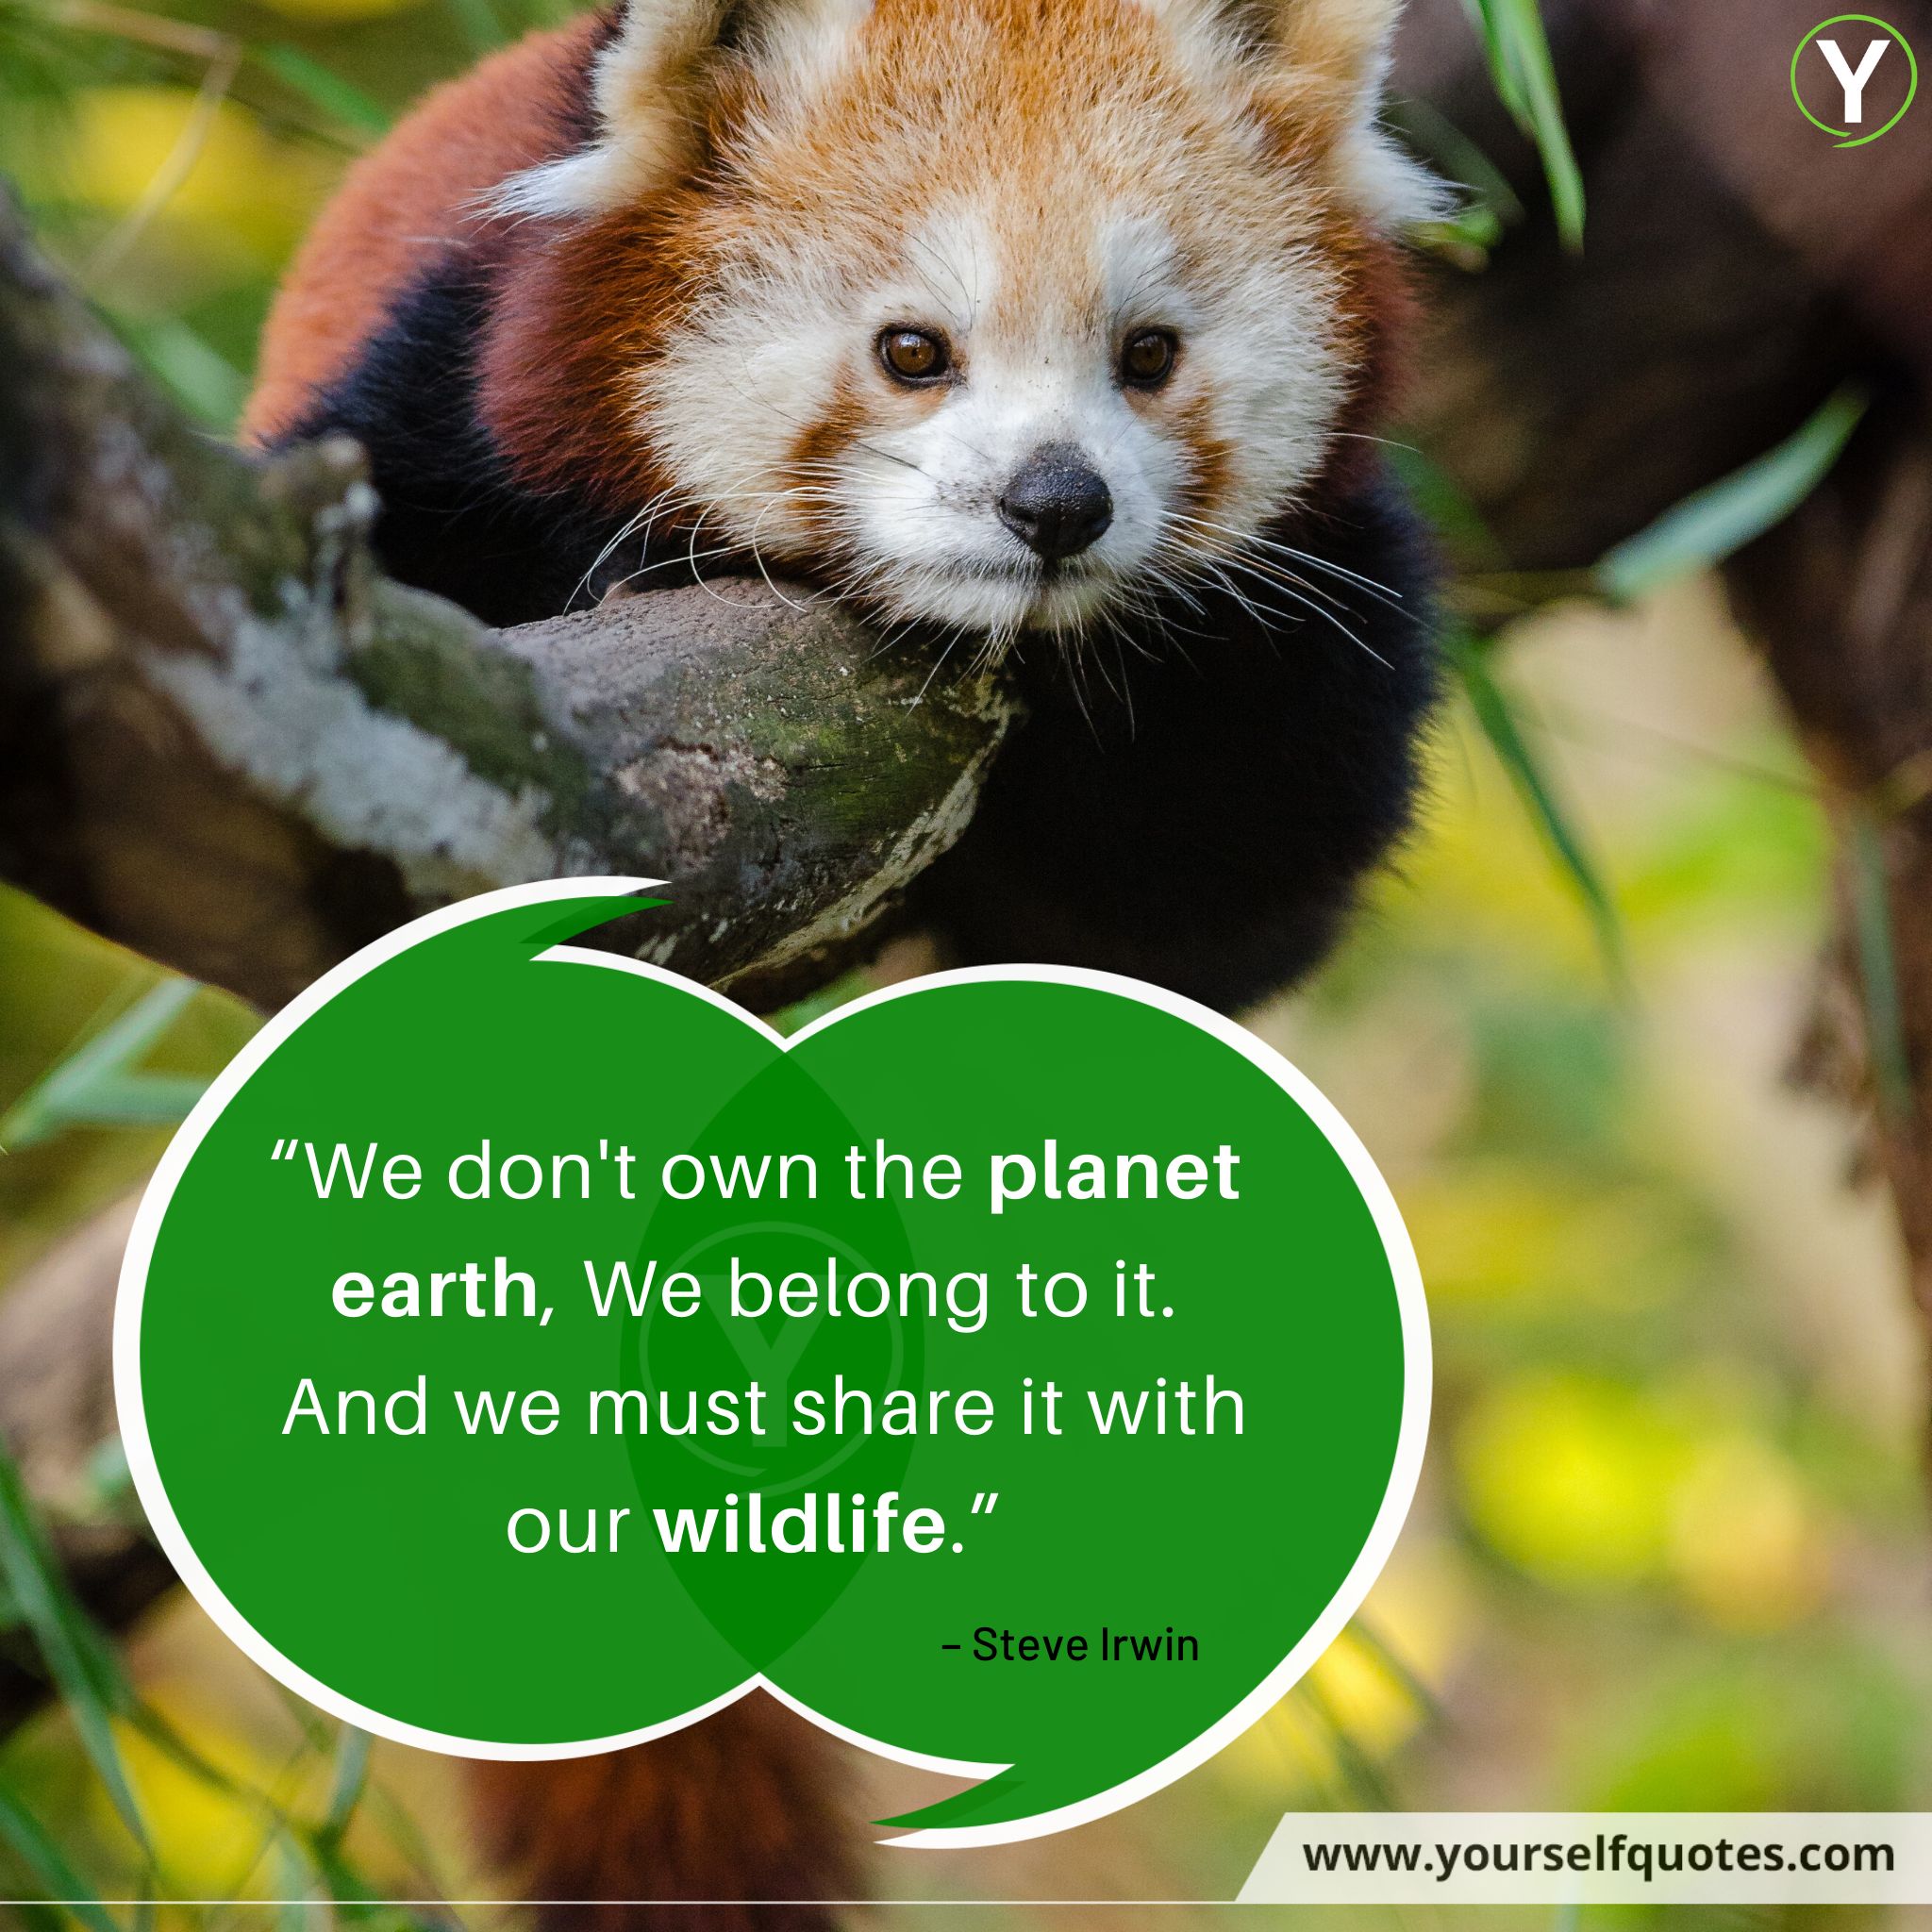 World Wildlife Day Quotes Wishes That Will Help Sustain All Life On Earth